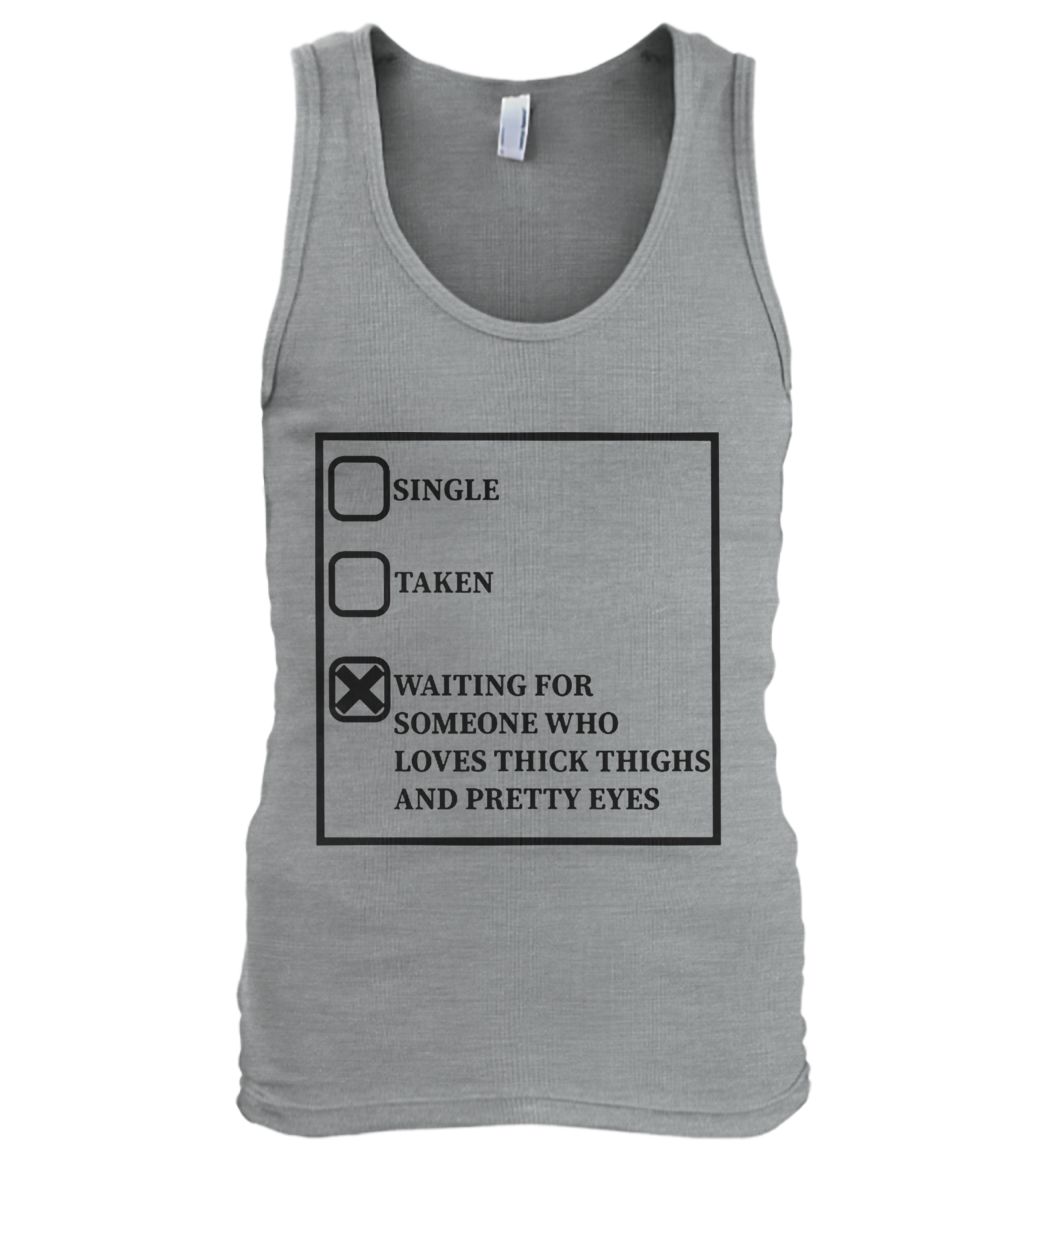 Single taken waiting for someone who loves thick thighs and pretty eyes men's tank top